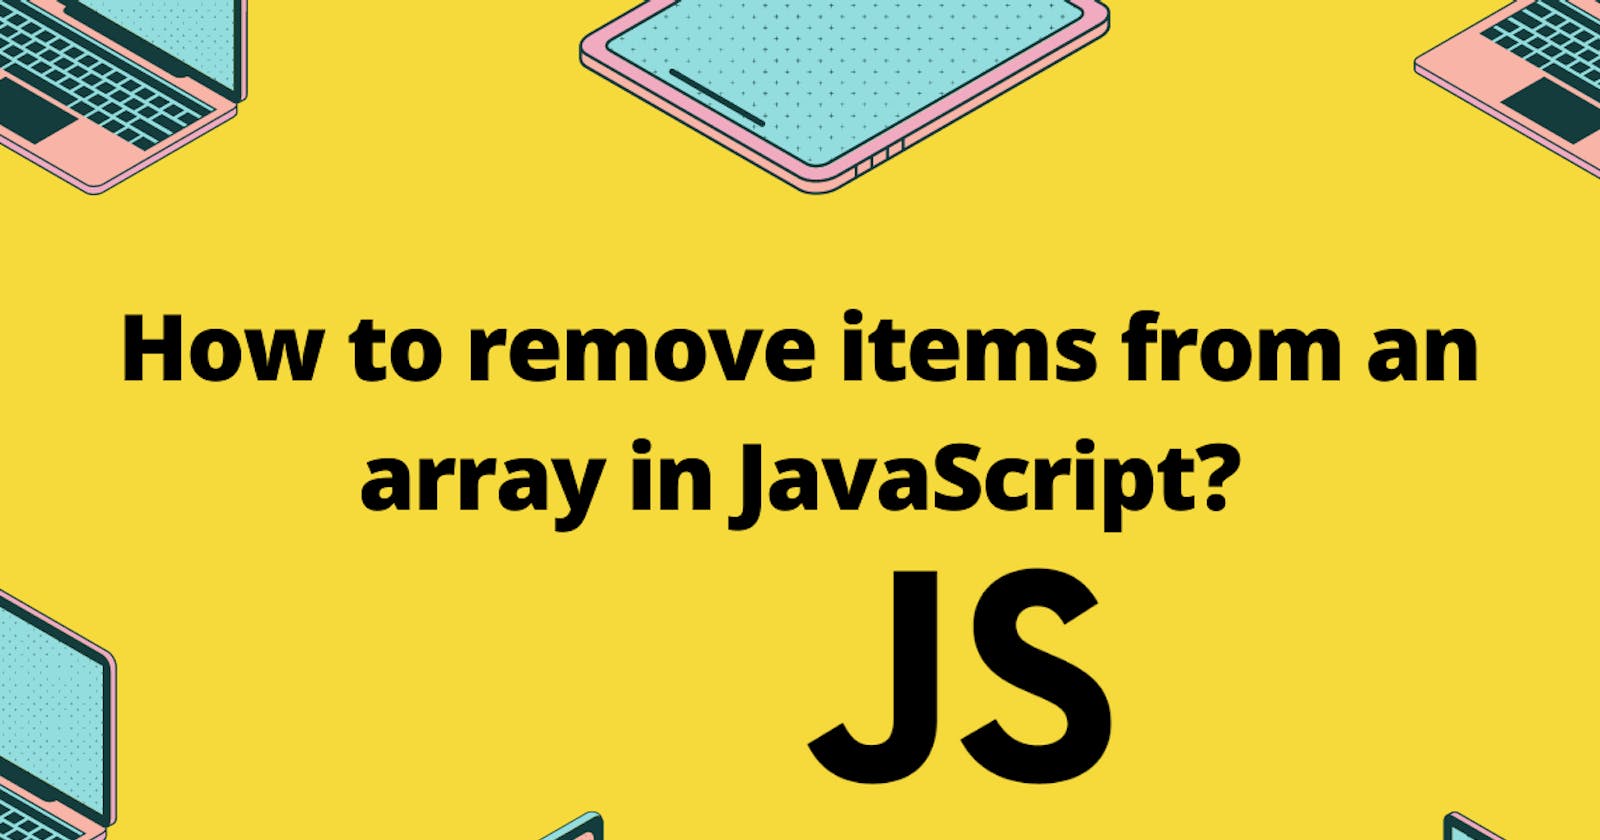 How to remove items from an array in JavaScript?